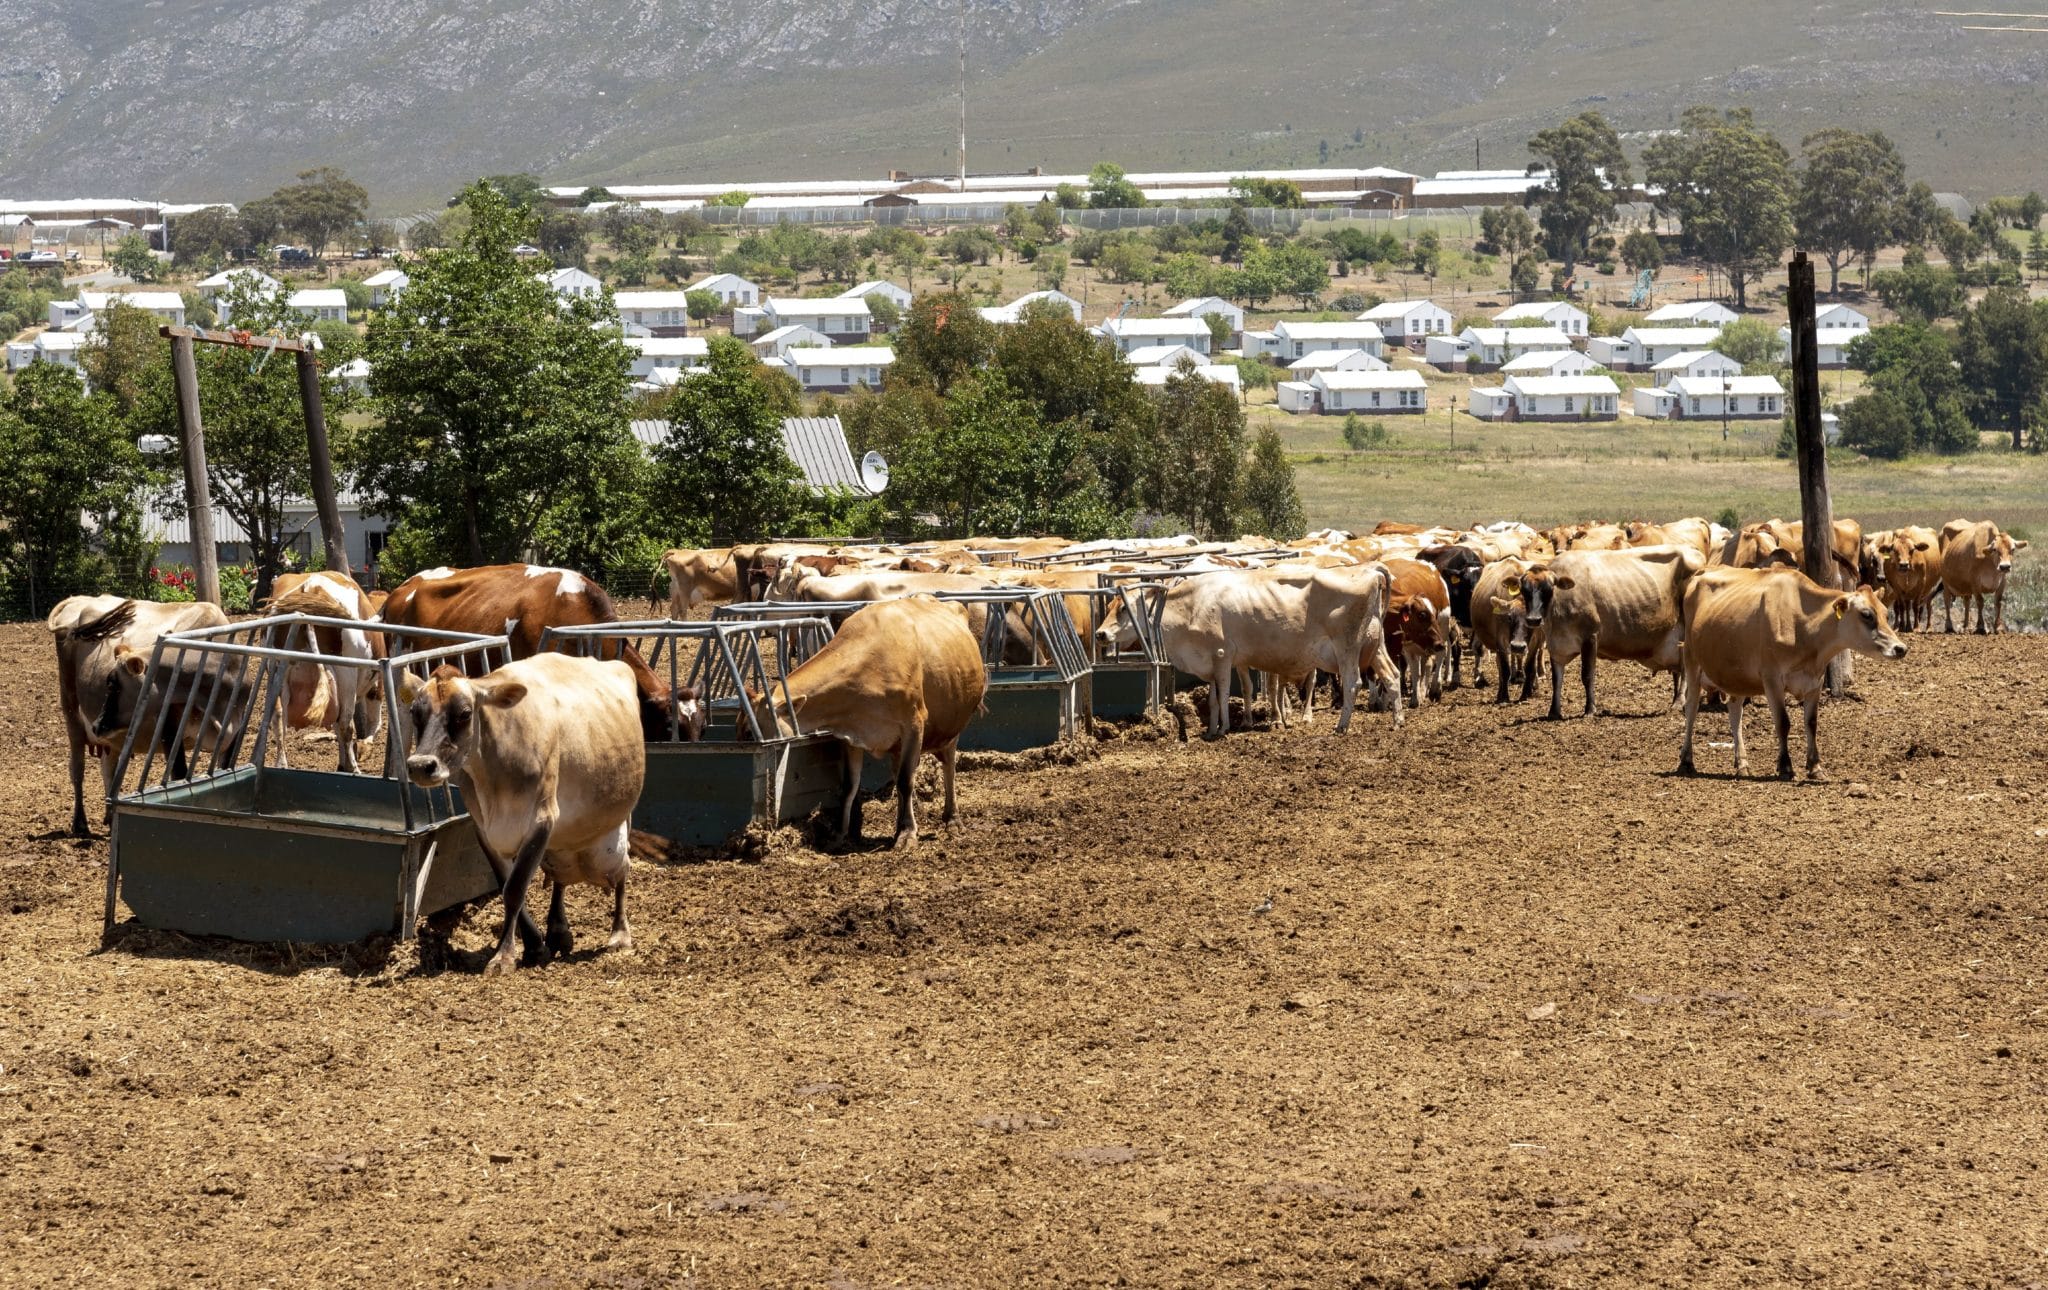 South African dairy farmers eye carbon credits while curbing emissions